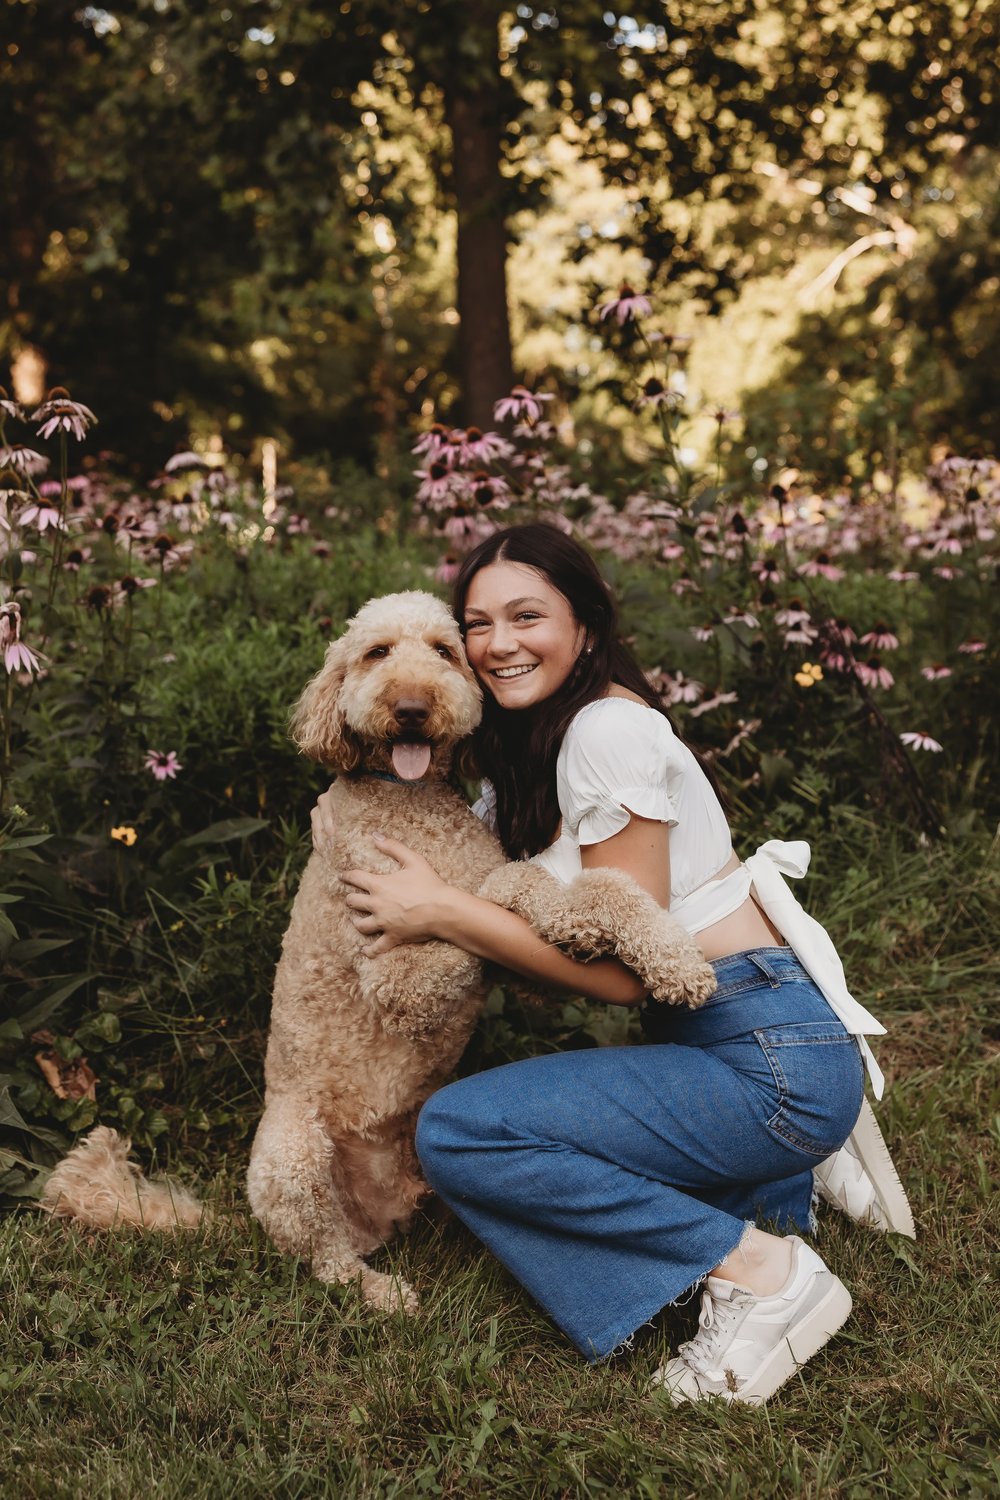  olivia and her dog pose for pictures in a grassy area 